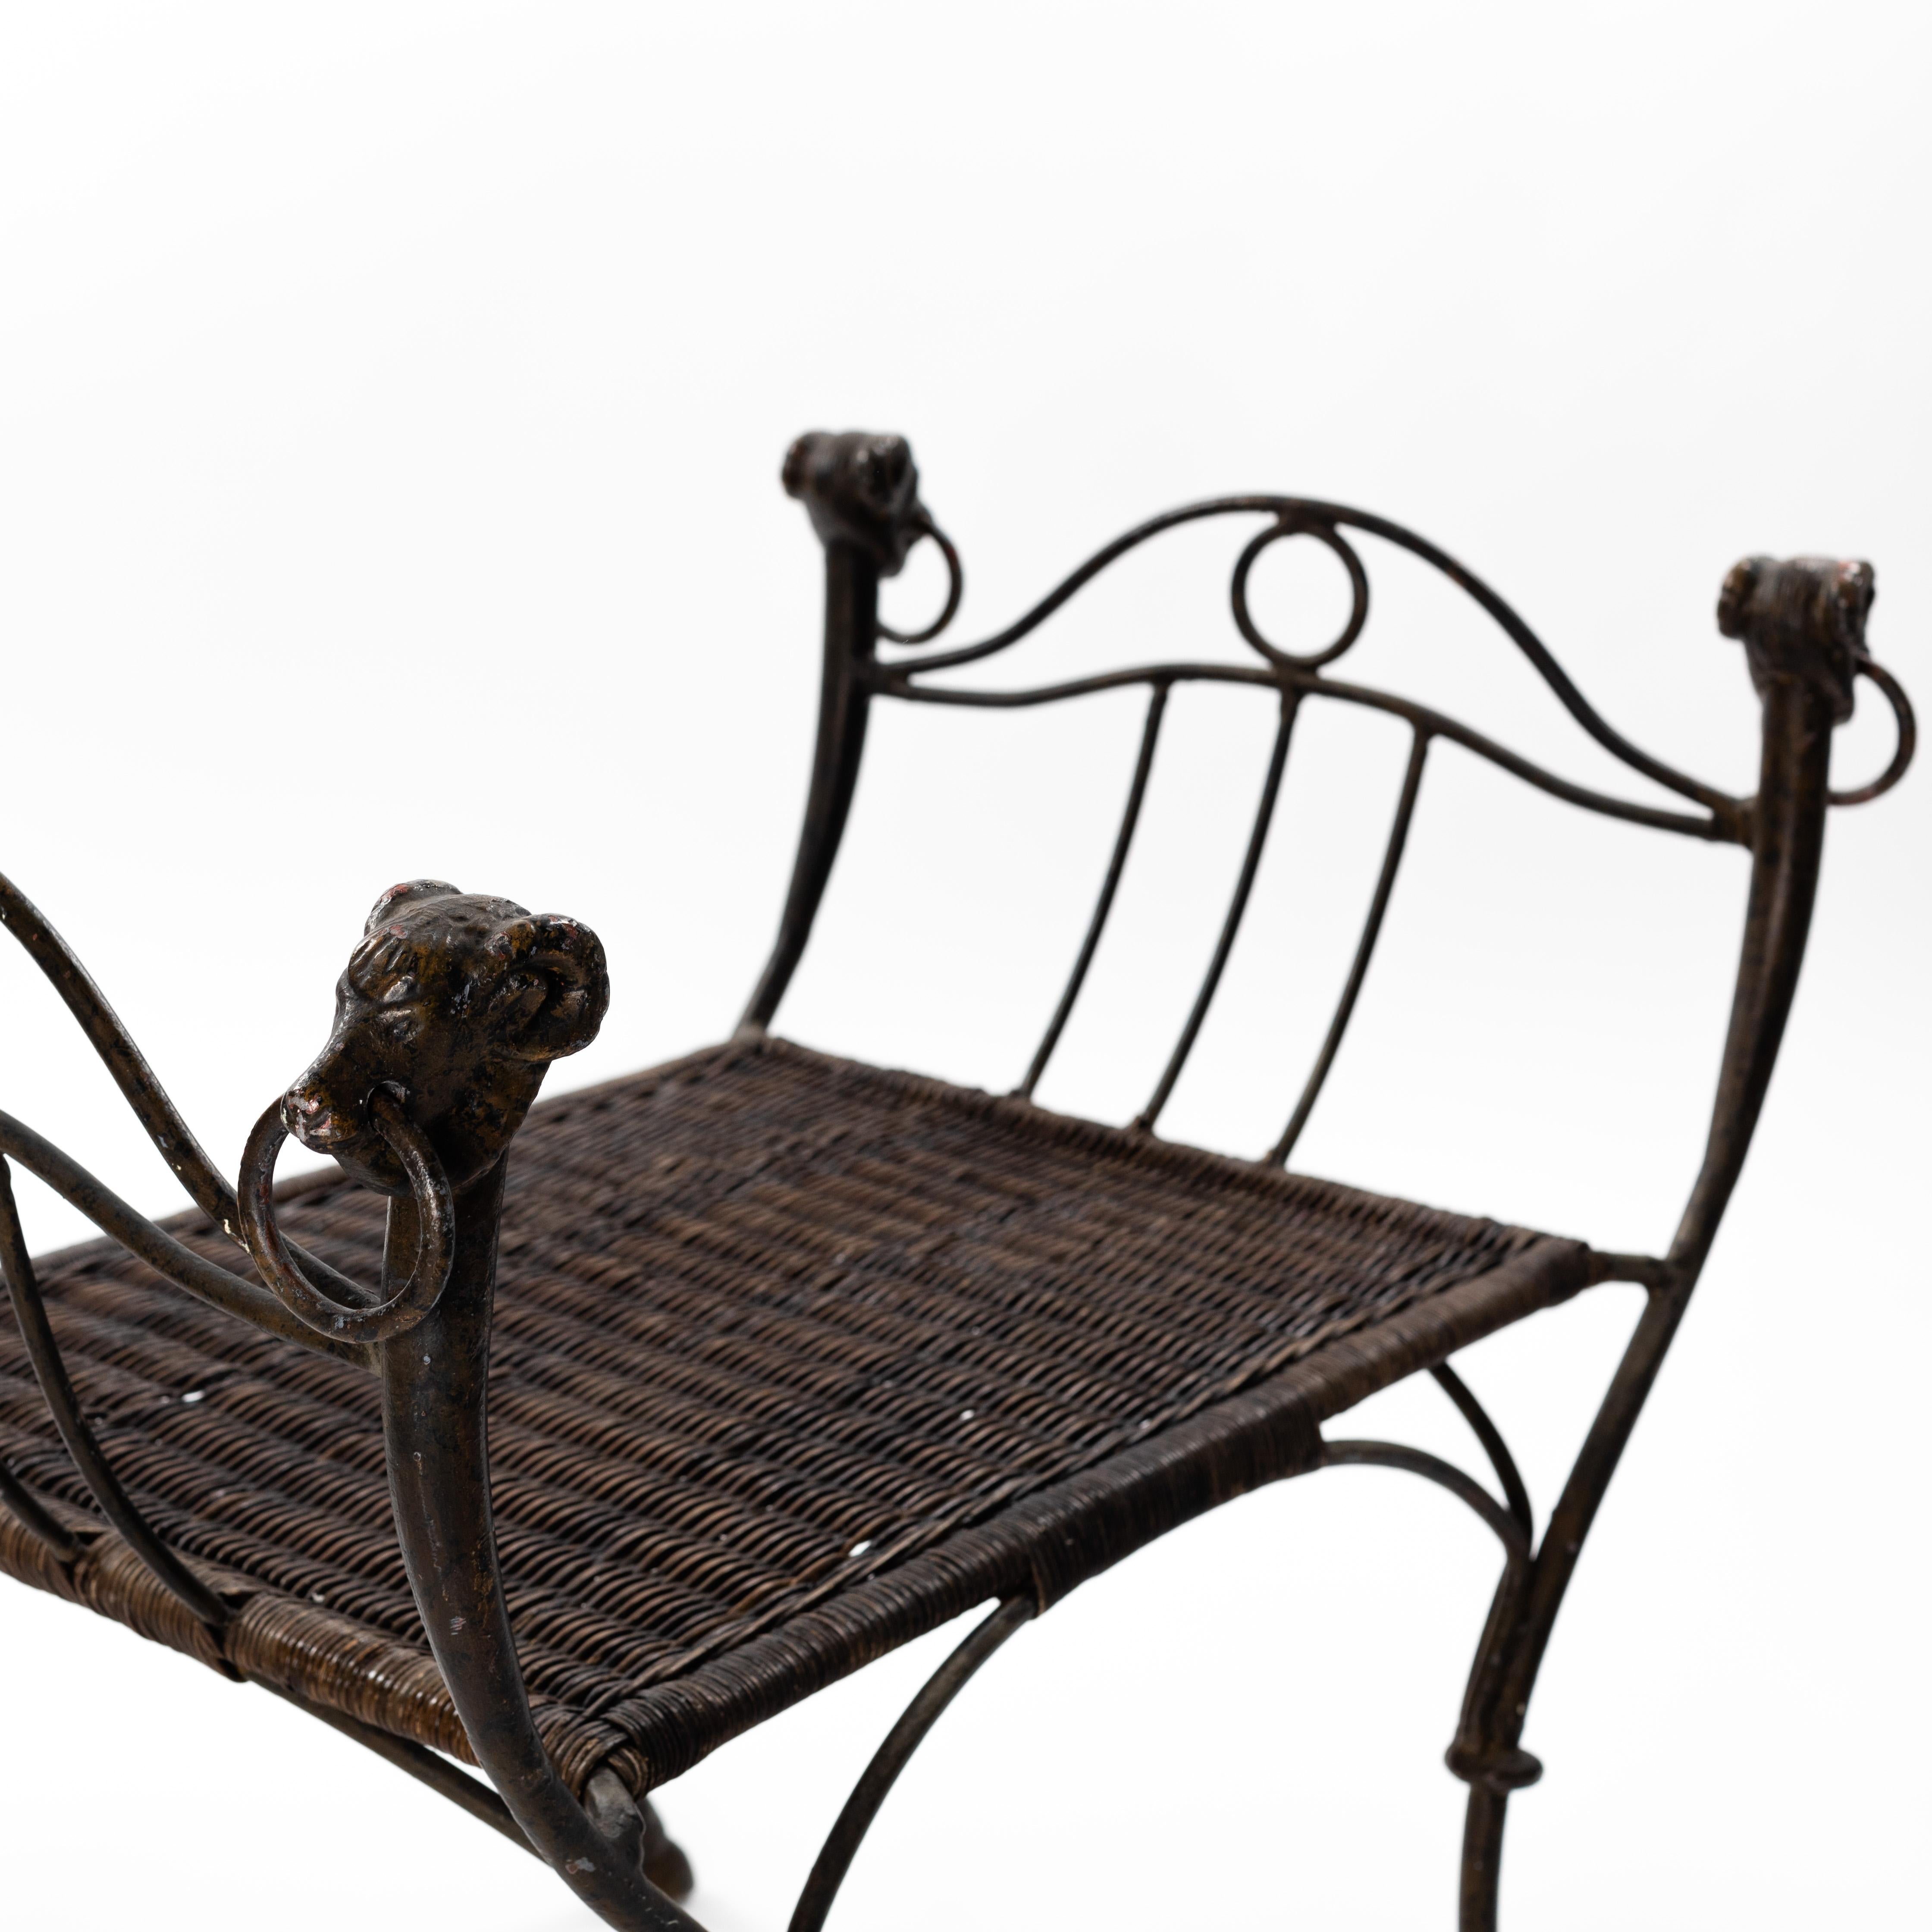 Mid-20th Century French Wrought Iron Bench with Ratan Seat Wickerwork from the 1940s